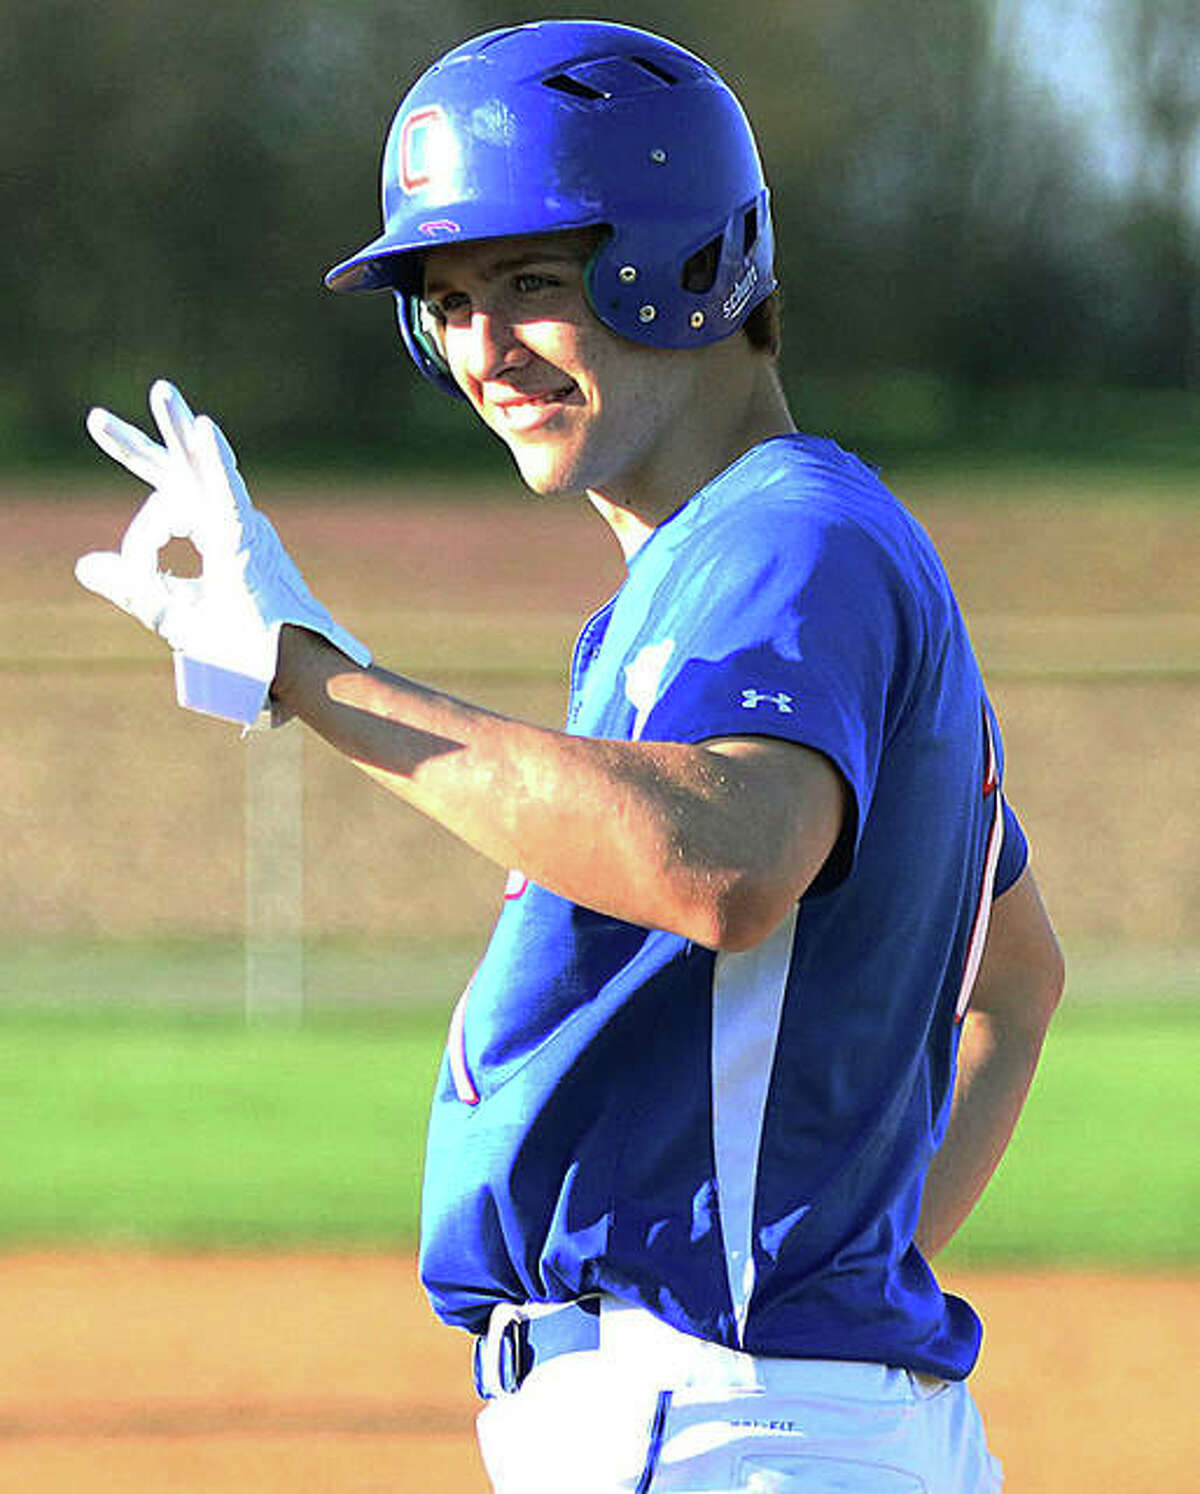 Carlinville’s Kyle Dixon acknowledges teammates in the dugout after his single Tuesday at Litchfield. Dixon, a SIUC recruit, is scheduled to make his first pitching start of the season Friday at Staunton.